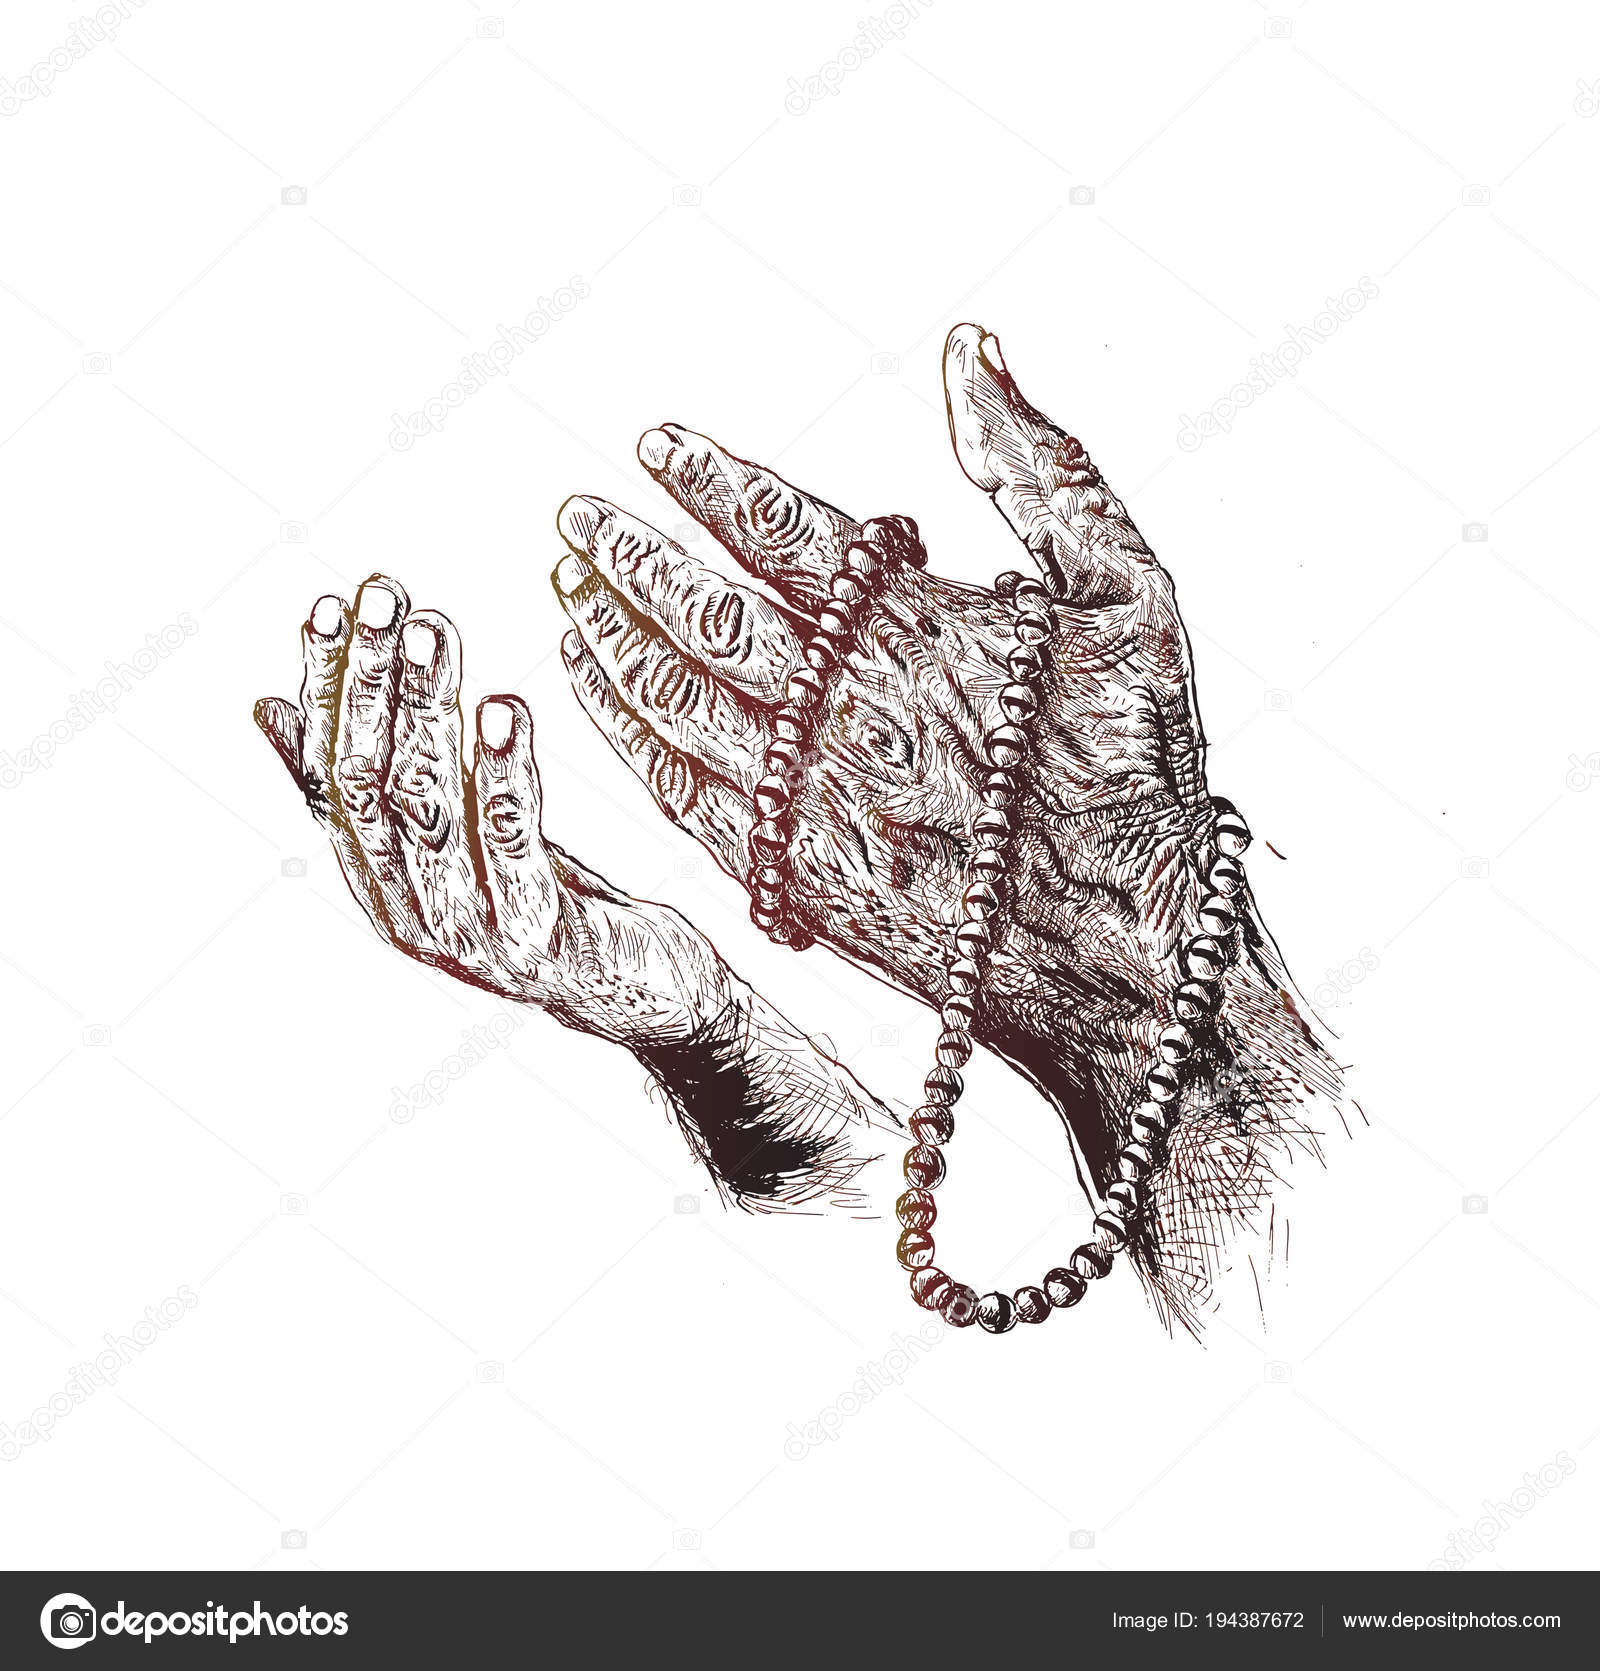 cartoon praying hands with rosary